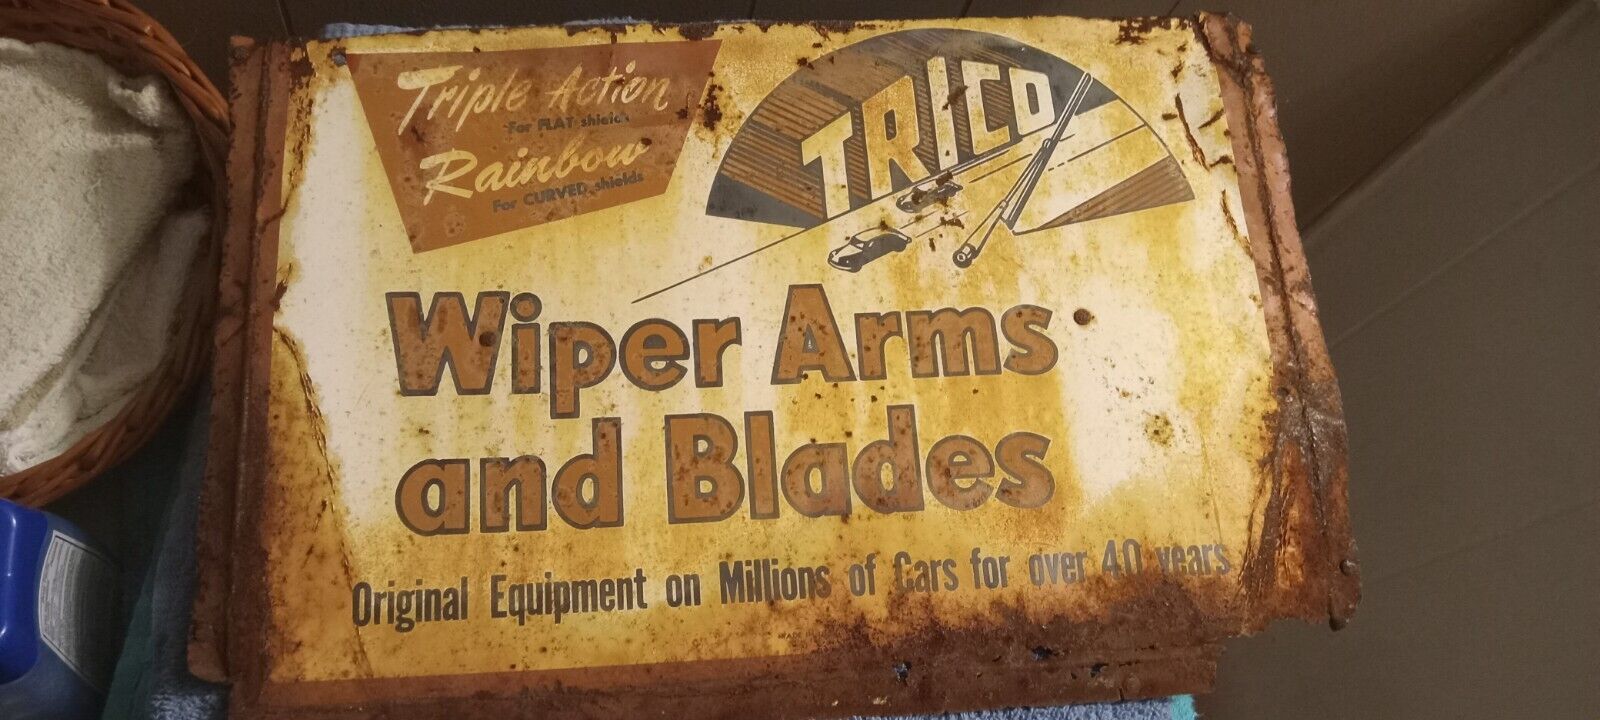 vintage trico wiper arms and blades sign